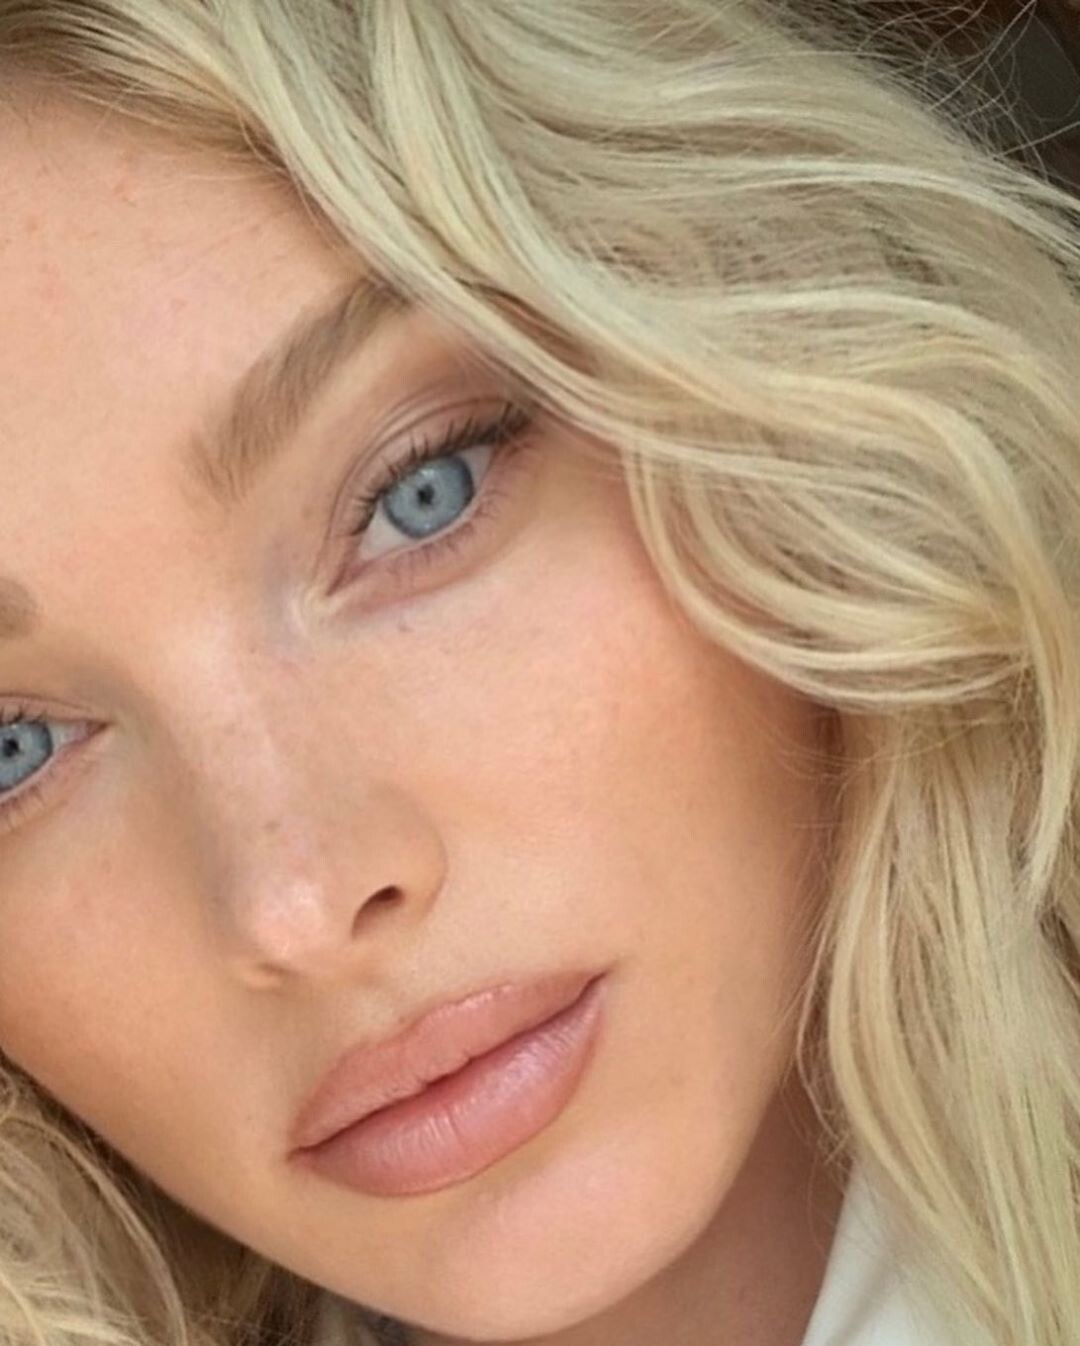 Photos n°9 : Elsa Hosk is The Needle in The Haystack!